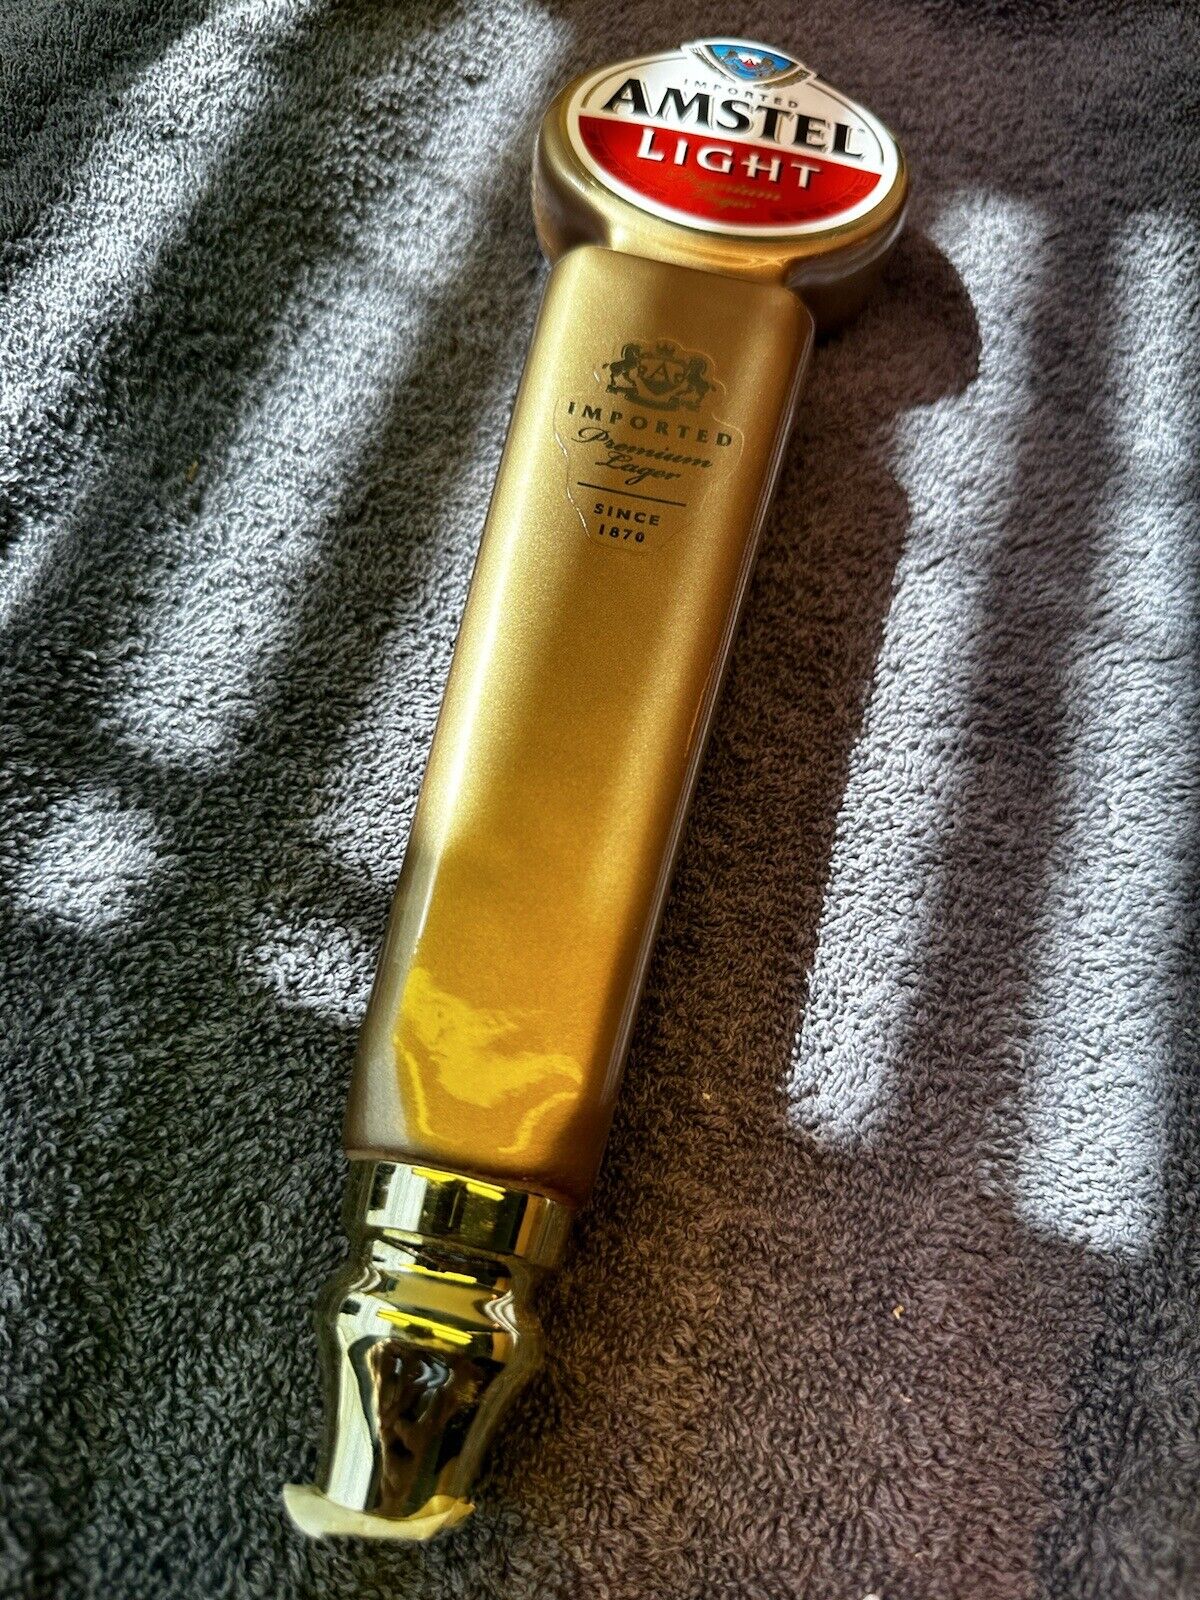 AMSTEL Light Imported Premium Lager Since 1870 2-Sided Gold Beer Tap Handle